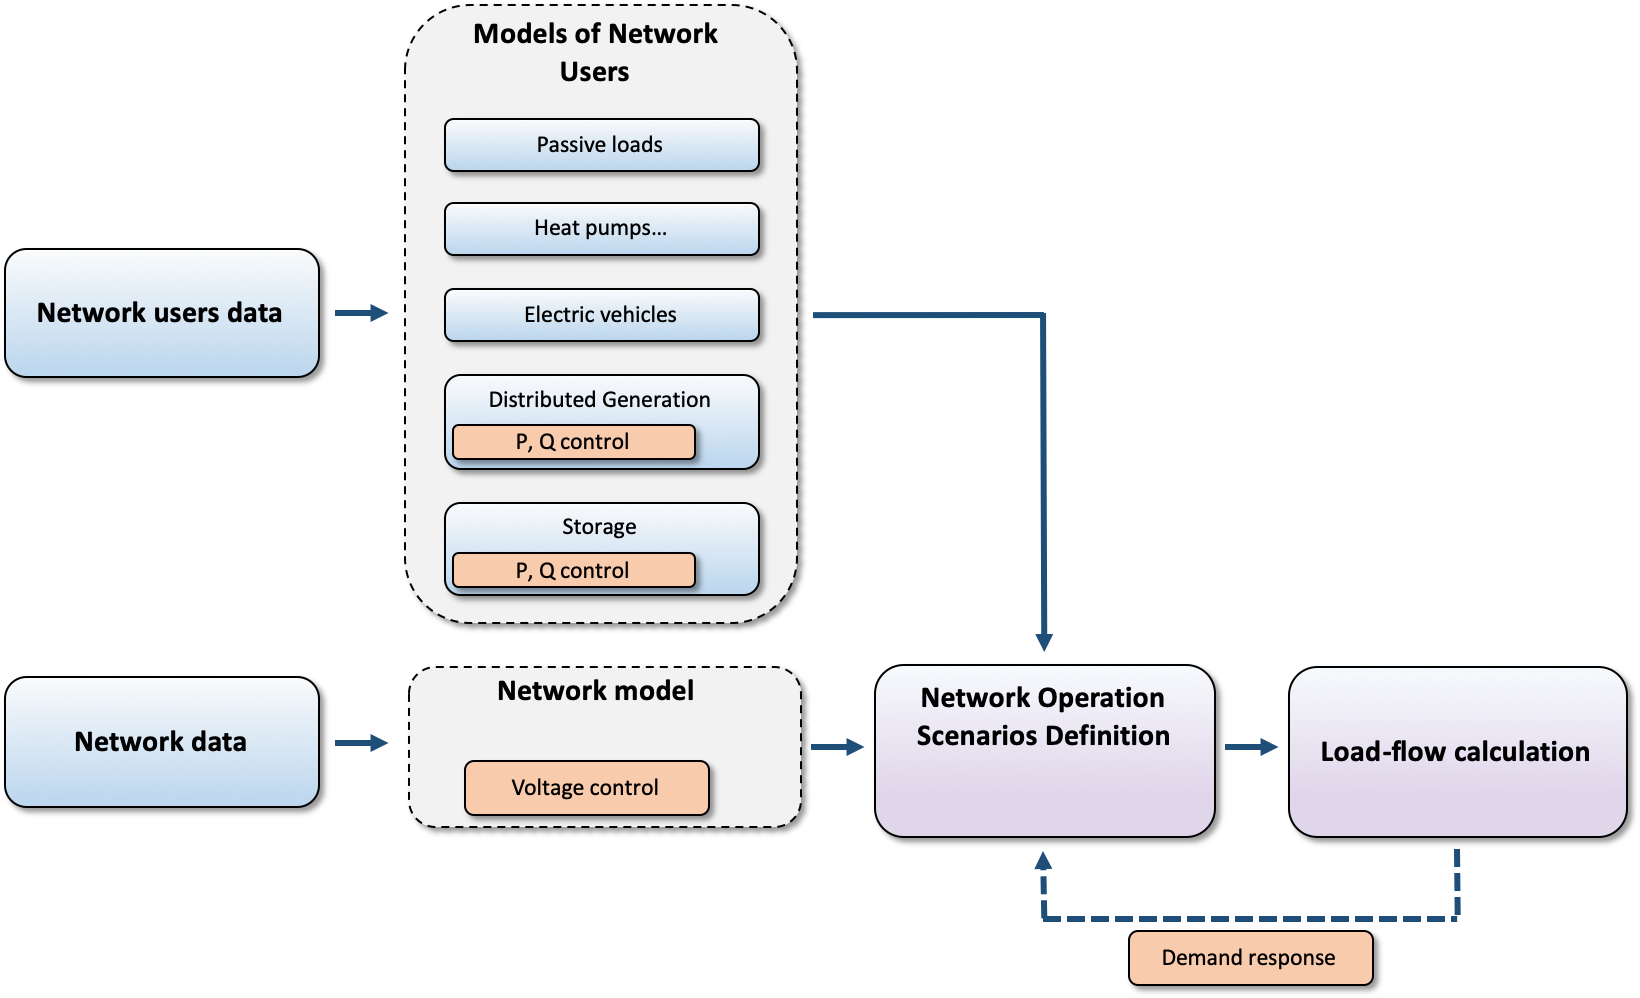 A basic structure of a network planning tool